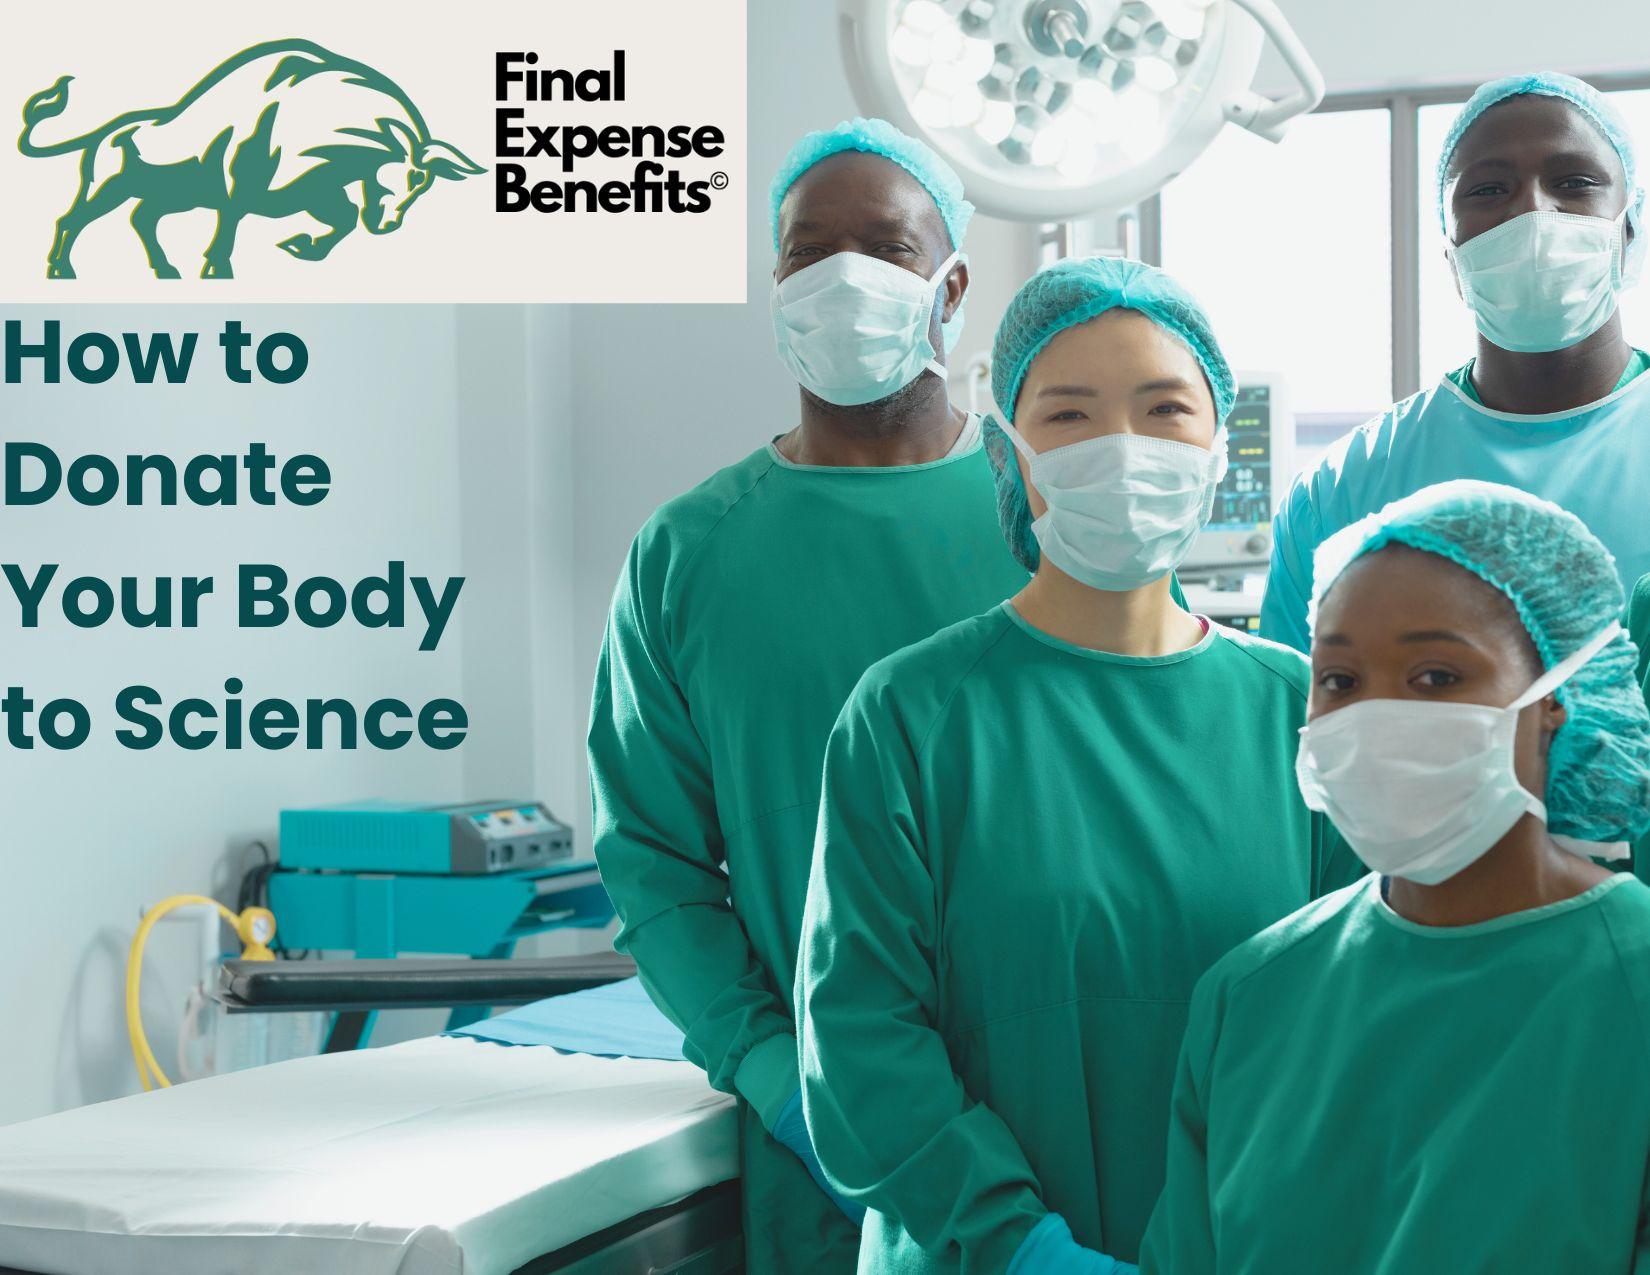 A group of four surgeons on the right side of the picture with the Final Expense Benefits logo on the top left corner. The words "How to Donate Your Body to Science" is directly under the logo.